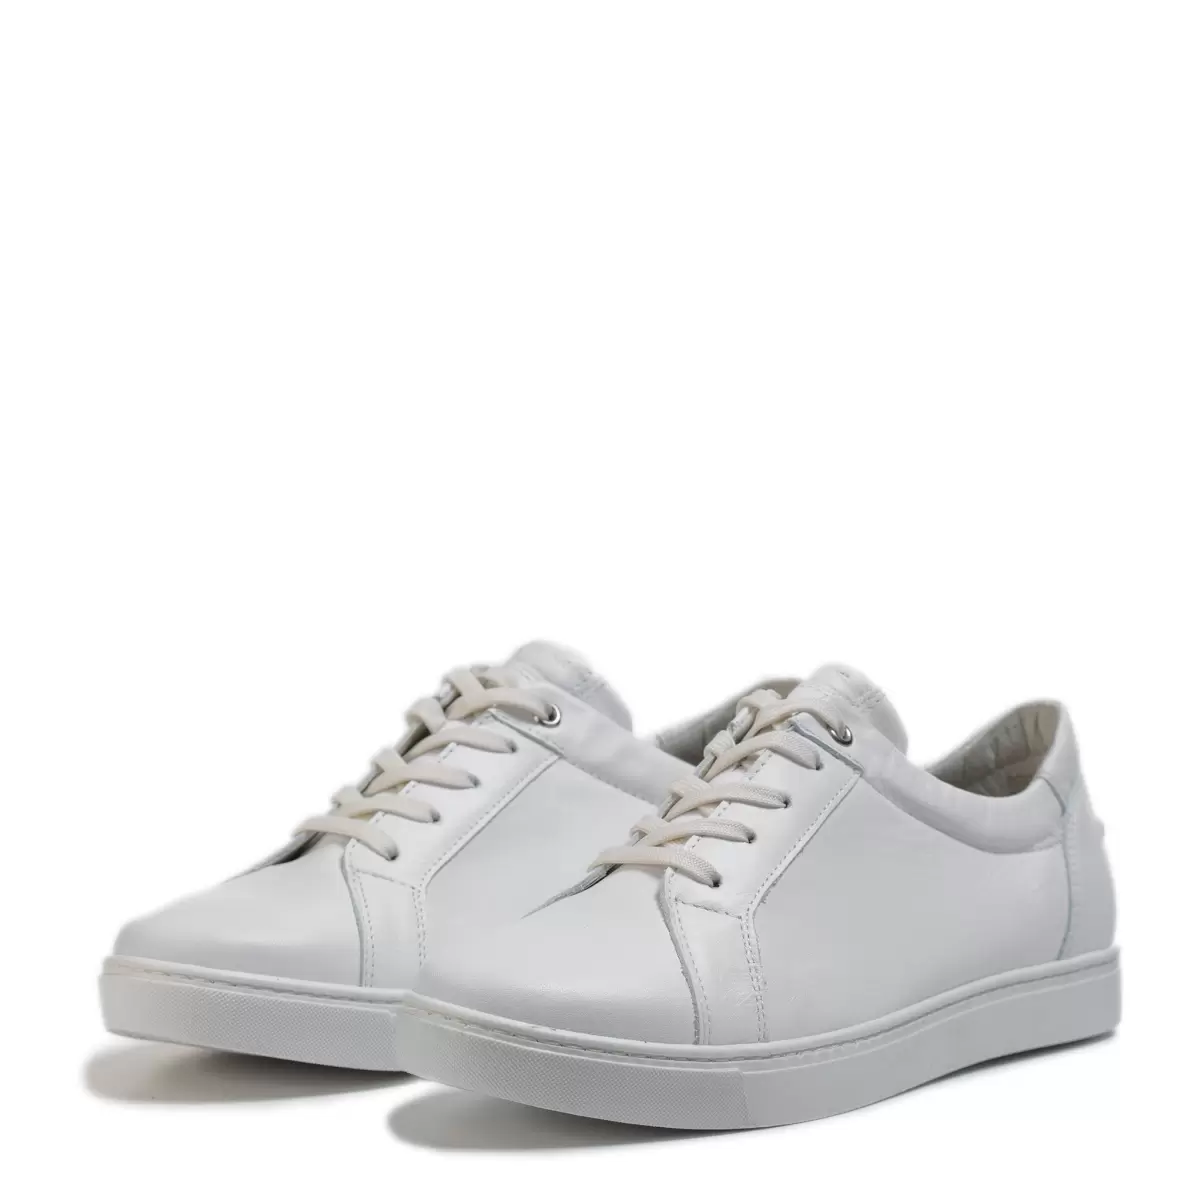 White Soft Nappa Aho Men’s Leather Sneakers Pomarfin Oy Sneakers Men - 4